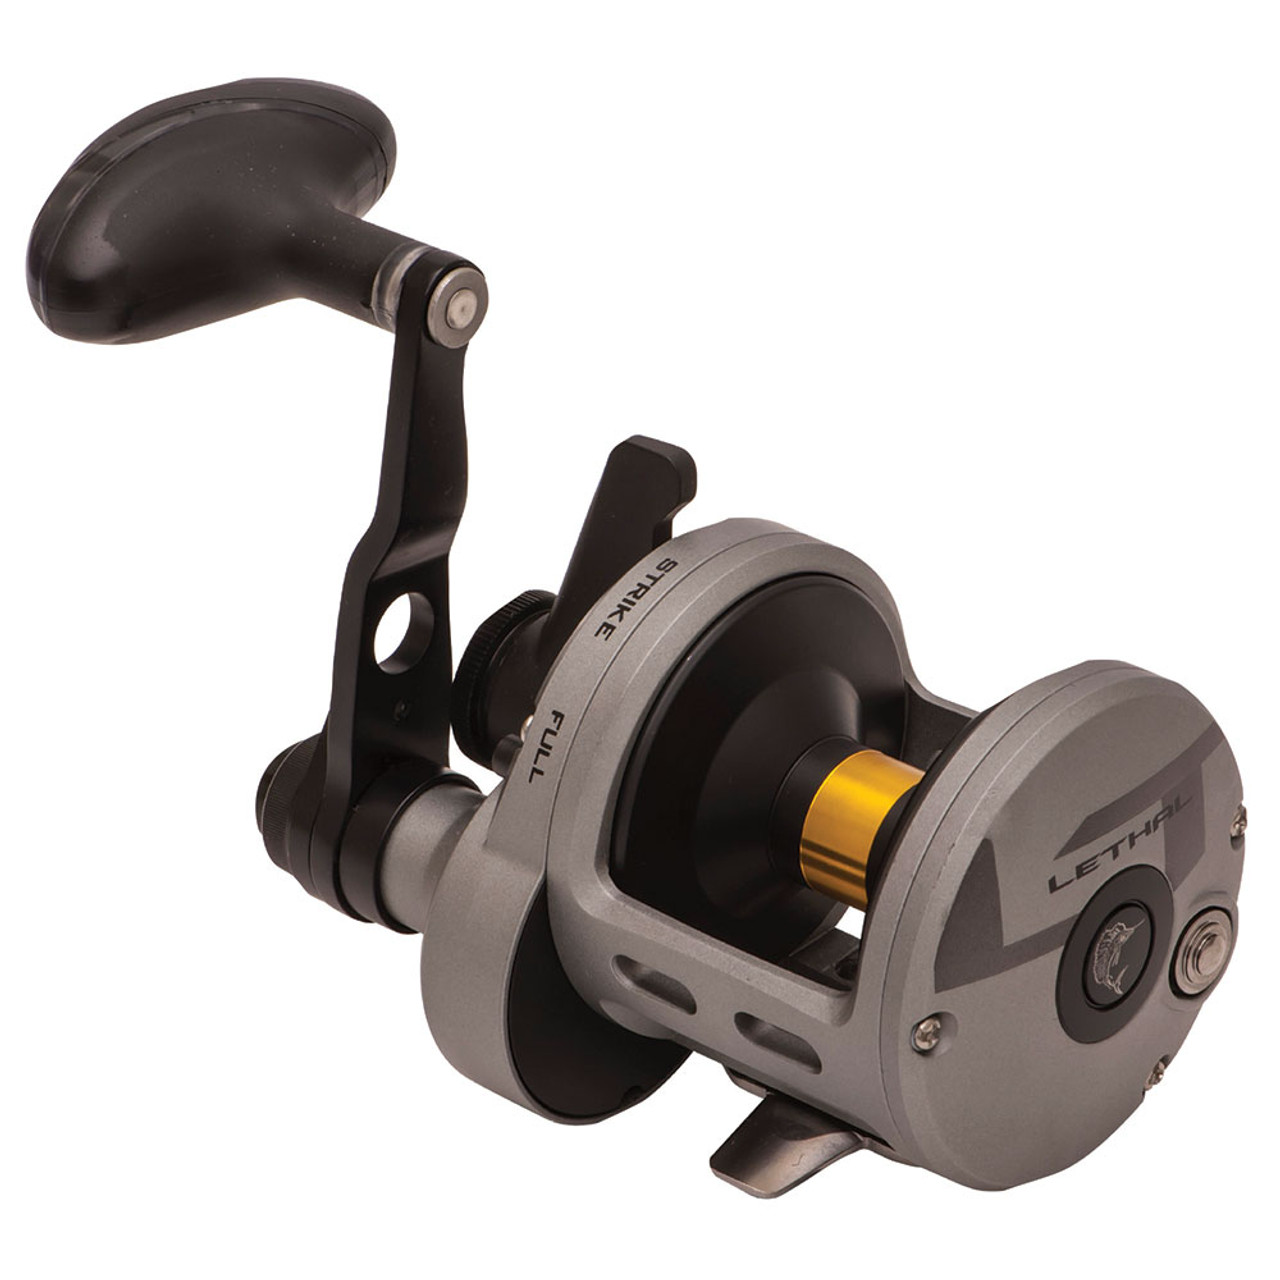 https://cdn11.bigcommerce.com/s-55834/images/stencil/1280x1280/products/3571/19311/fin-nor-lethal-lever-drag-fishing-reel__56977.1709929374.jpg?c=2